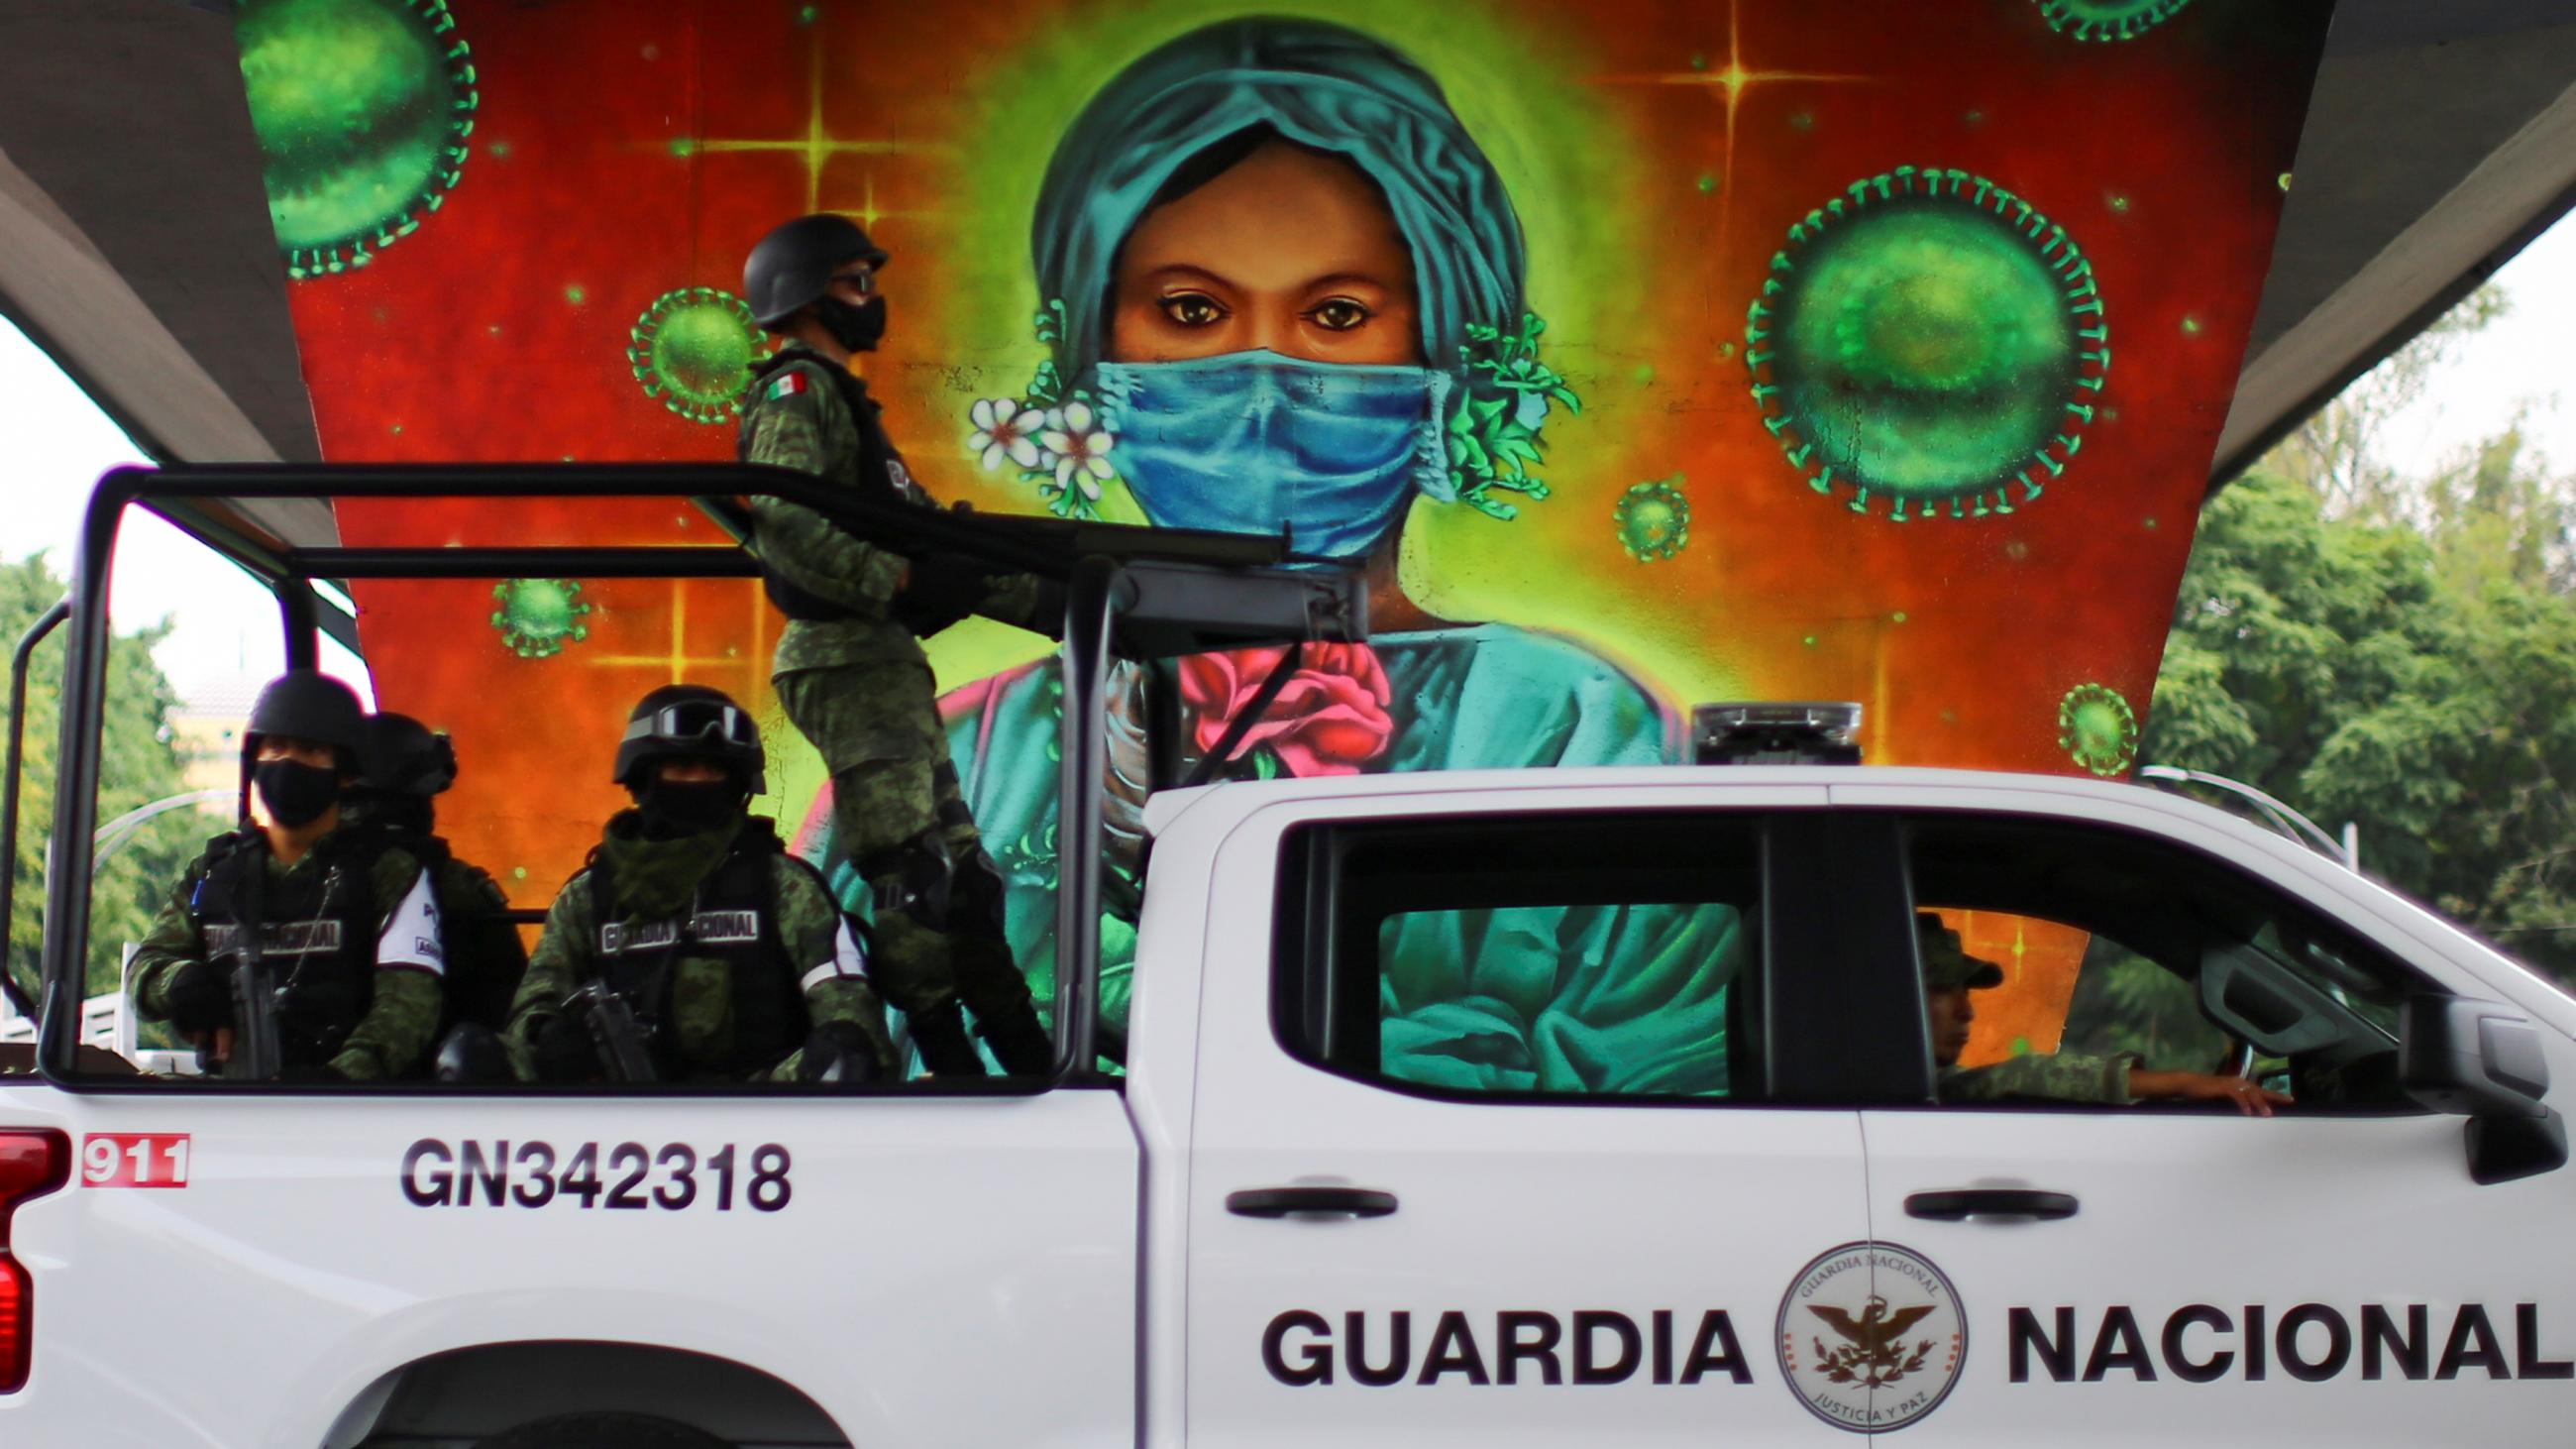 A mural in honor of health workers is pictured under a bridge in Mexico City, Mexico, on September 24, 2020.